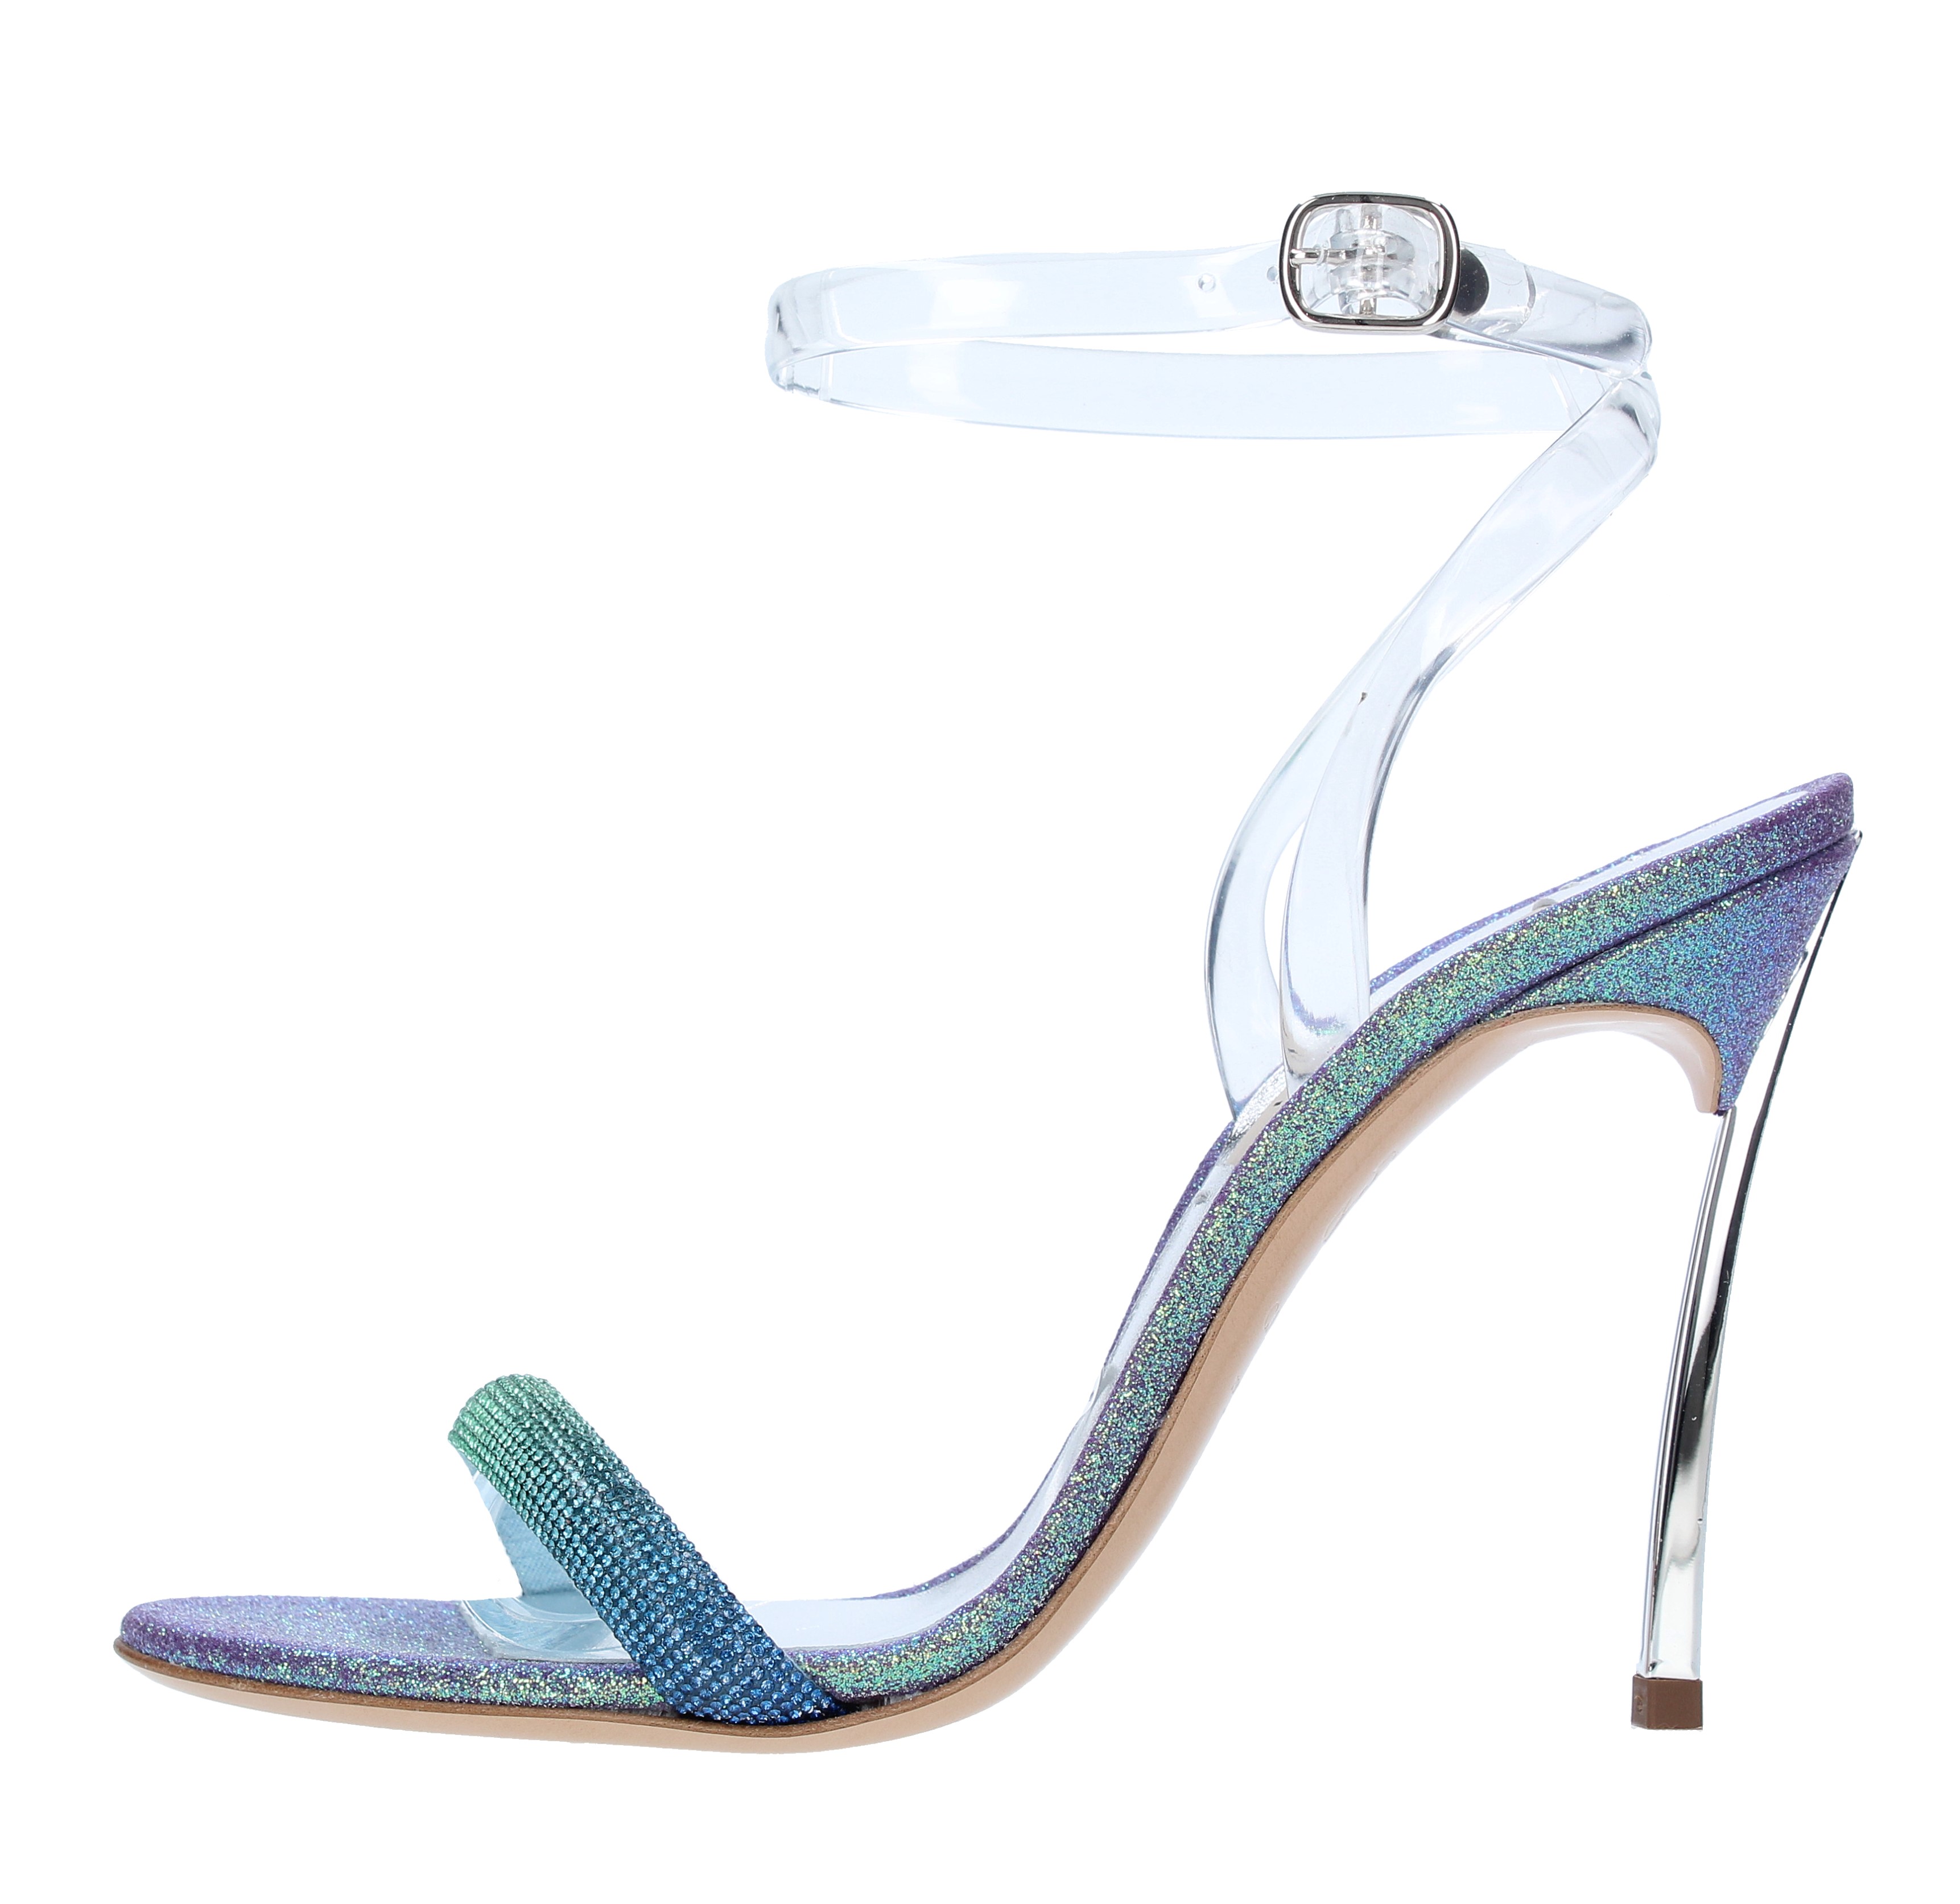 Blade Hollywood PVC sandals in leather and micro rhinestones - CASADEI -  Ginevra calzature